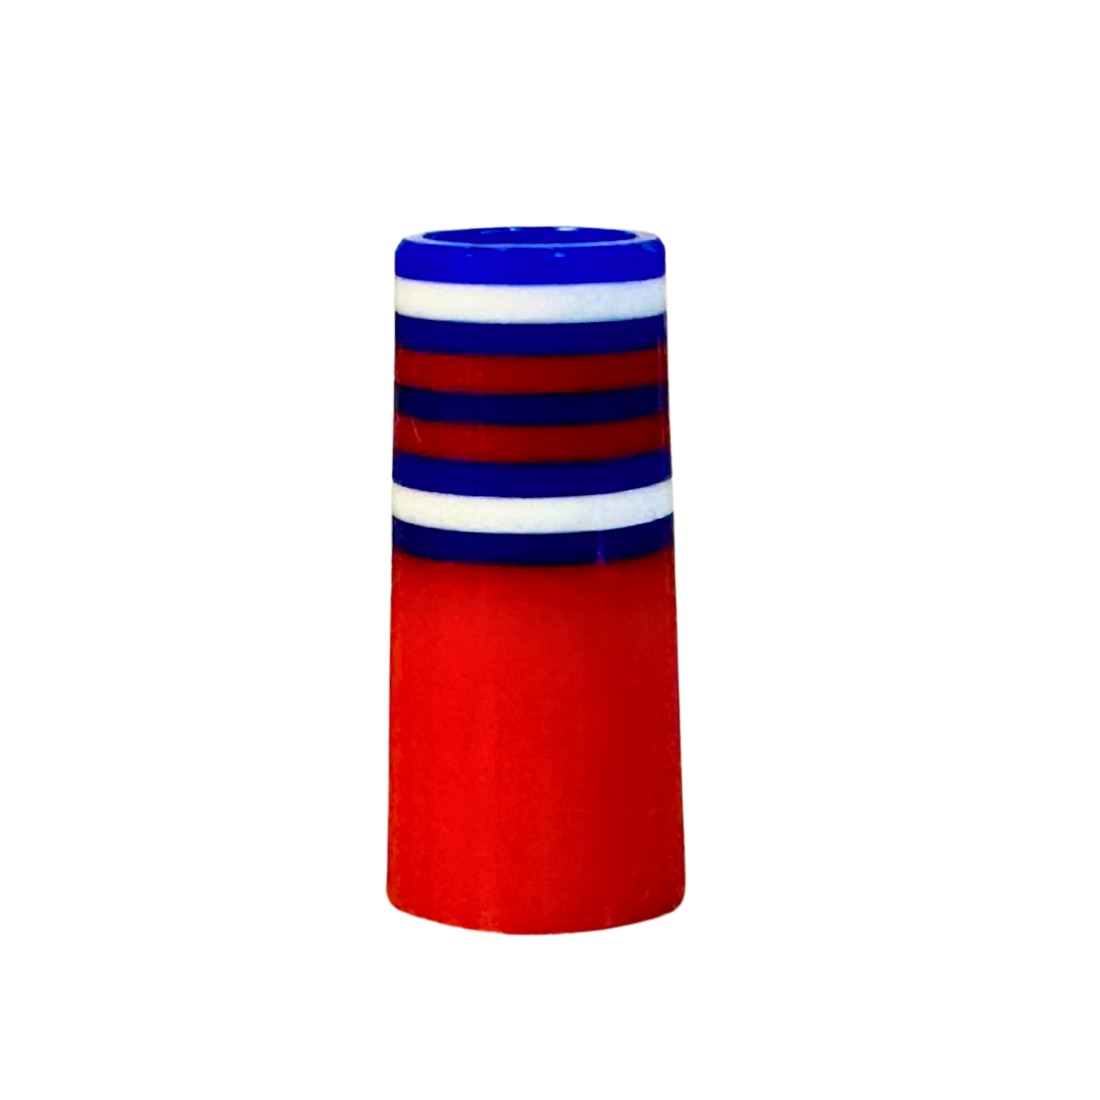 Red White and Blue Custom Golf Ferrule - The Patriot 2.0